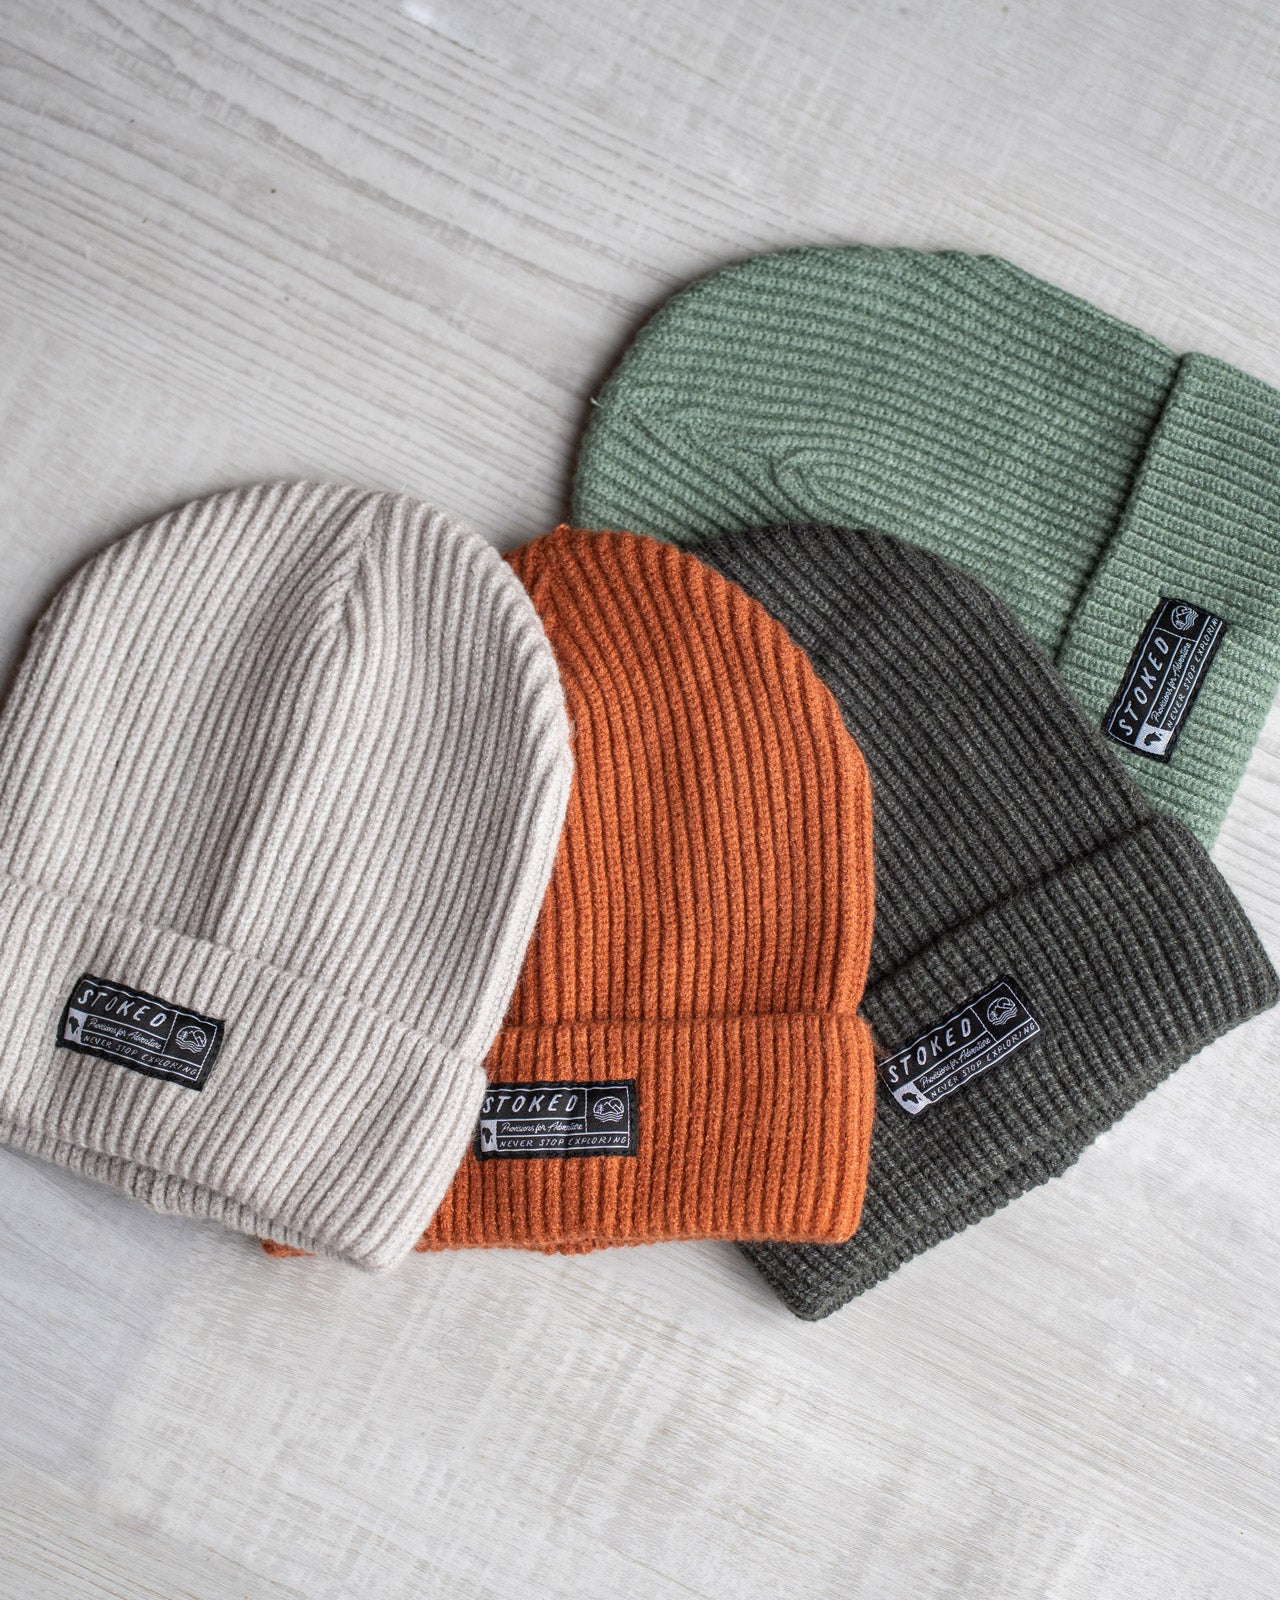 The Nomad Beanie - Moody Green - Stokedthebrand. Lifestyle products for outdoor adventures. Made in South Africa